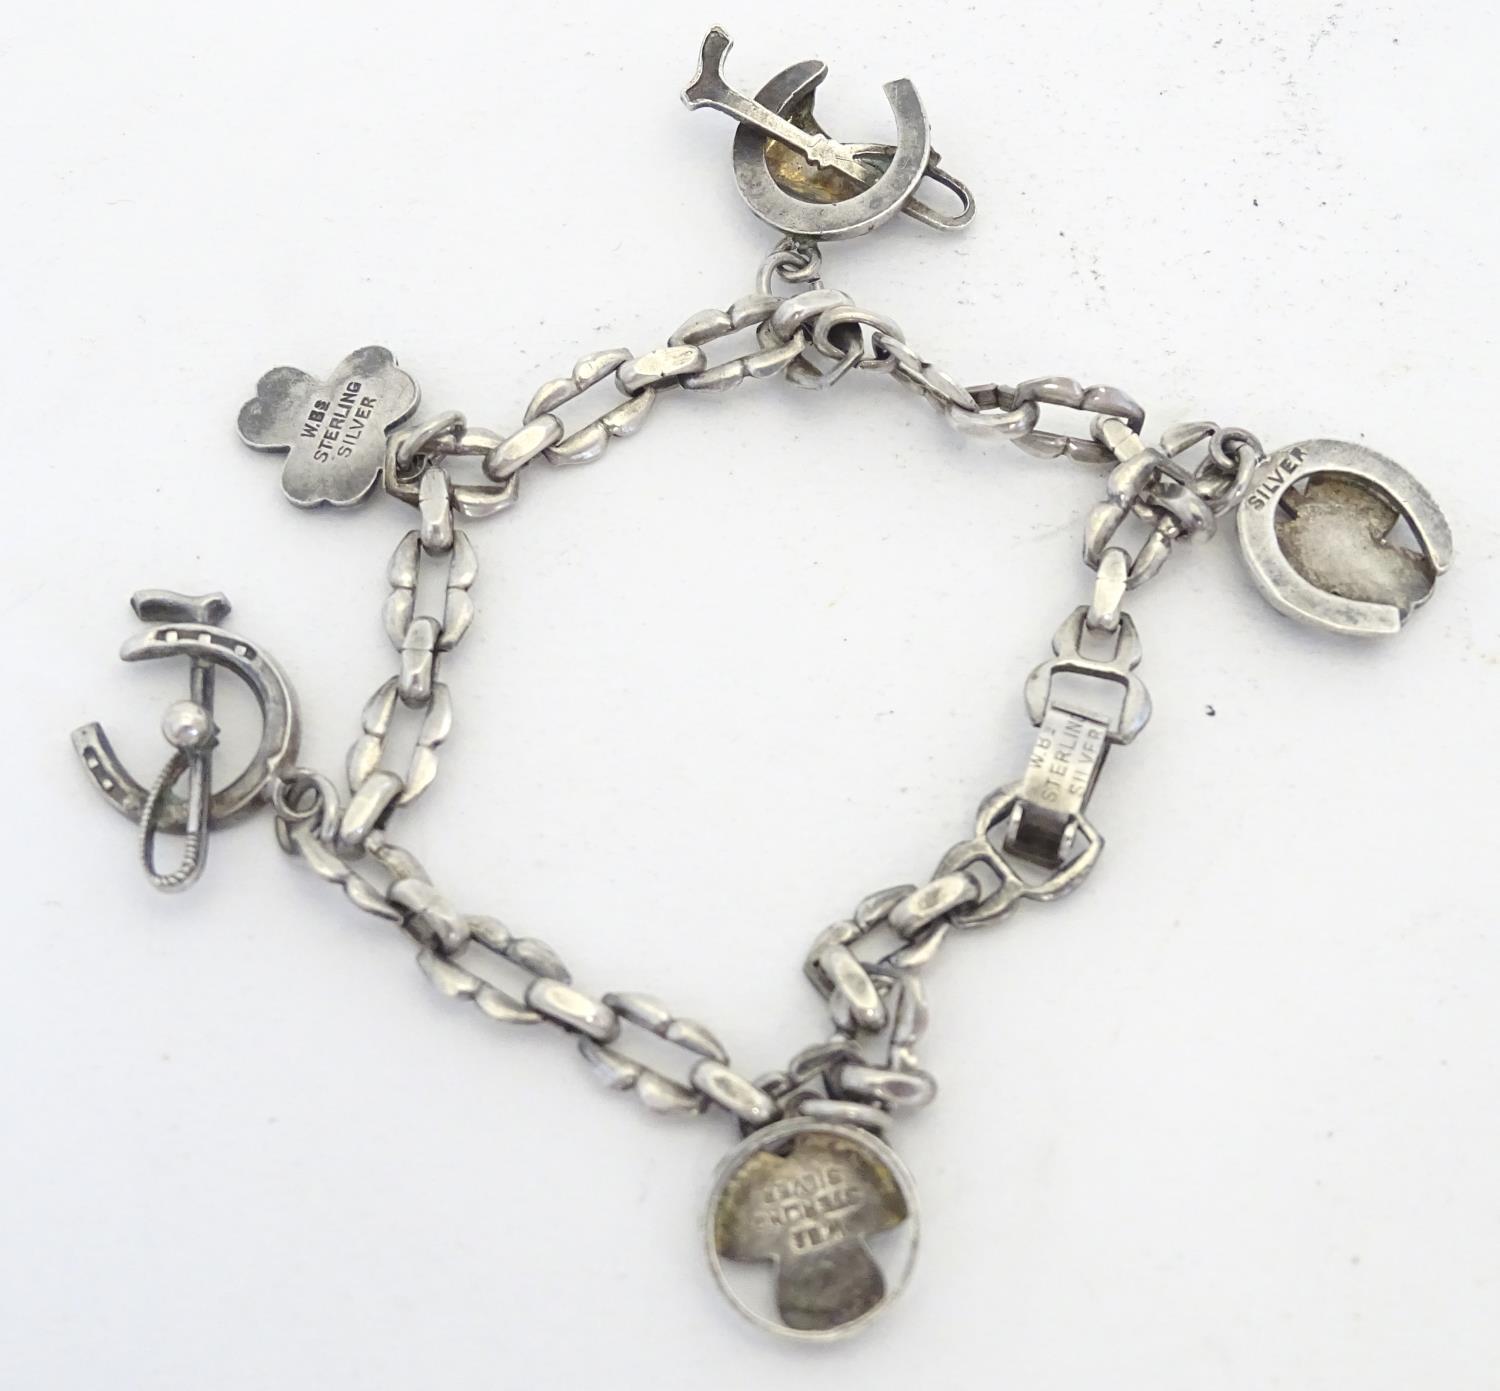 A silver charm bracelet set with various charms including horseshoe, horsehead and horseshoe and - Image 7 of 9